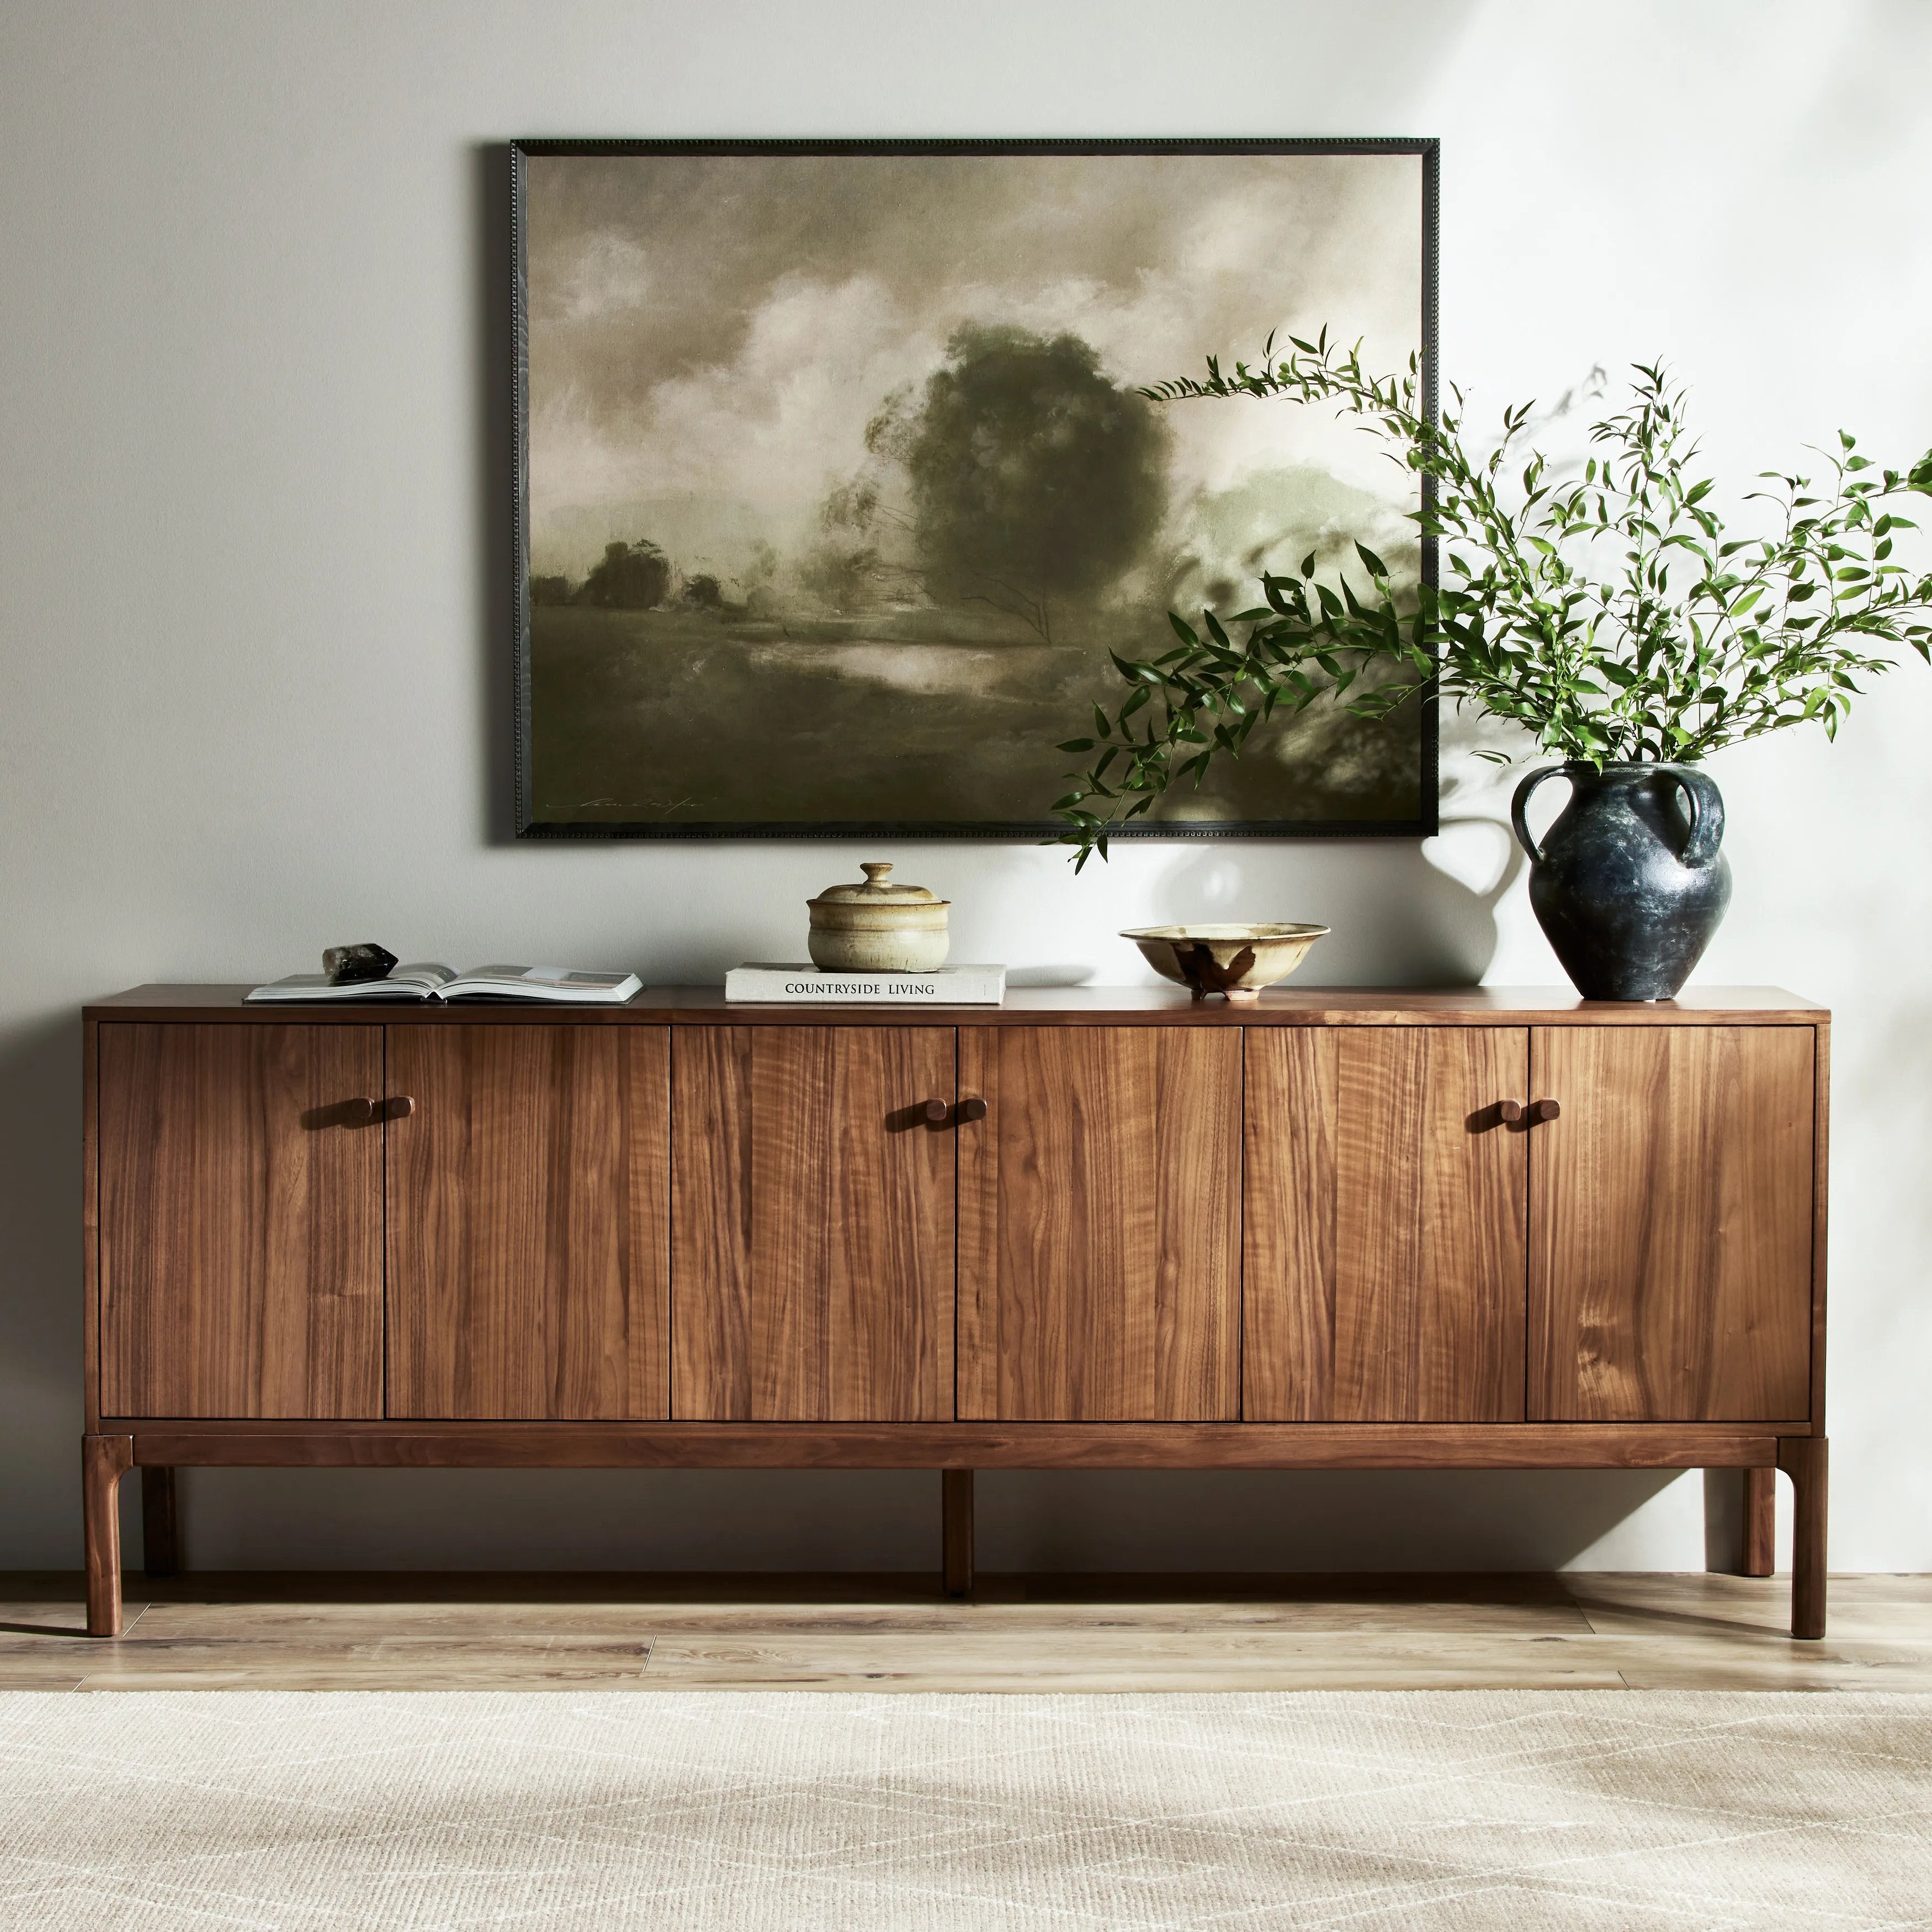 Inspired by campaign-style furniture of the 1800s â€” packable pieces first designed for traveling military use â€” a simply shaped sideboard of natural walnut features a subtly inset top and rounded legs, finished with wooden hardware Amethyst Home provides interior design, new home construction design consulting, vintage area rugs, and lighting in the Salt Lake City metro area.